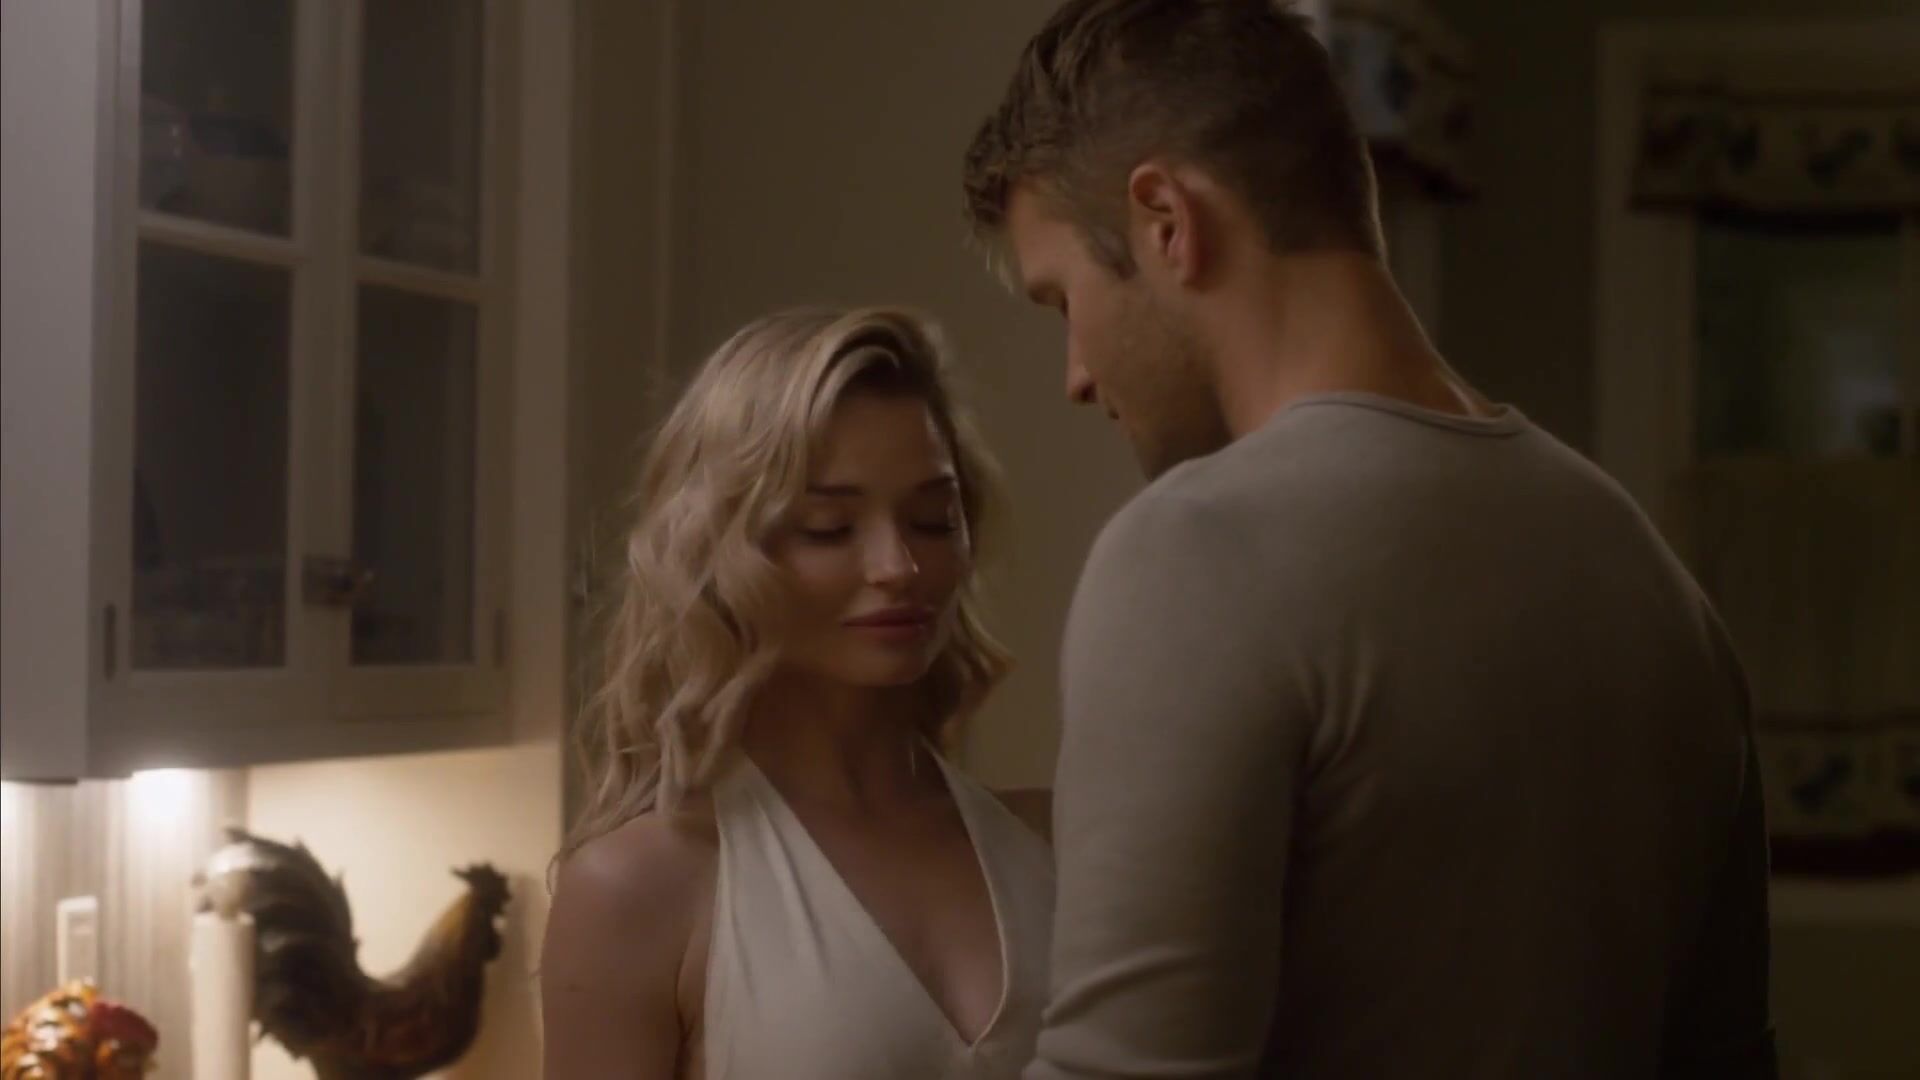 Hairypussy Sexy British MILF Emma Rigby in sex scene from feature film Hollywood Dirt (2017) LargePornTube - 1